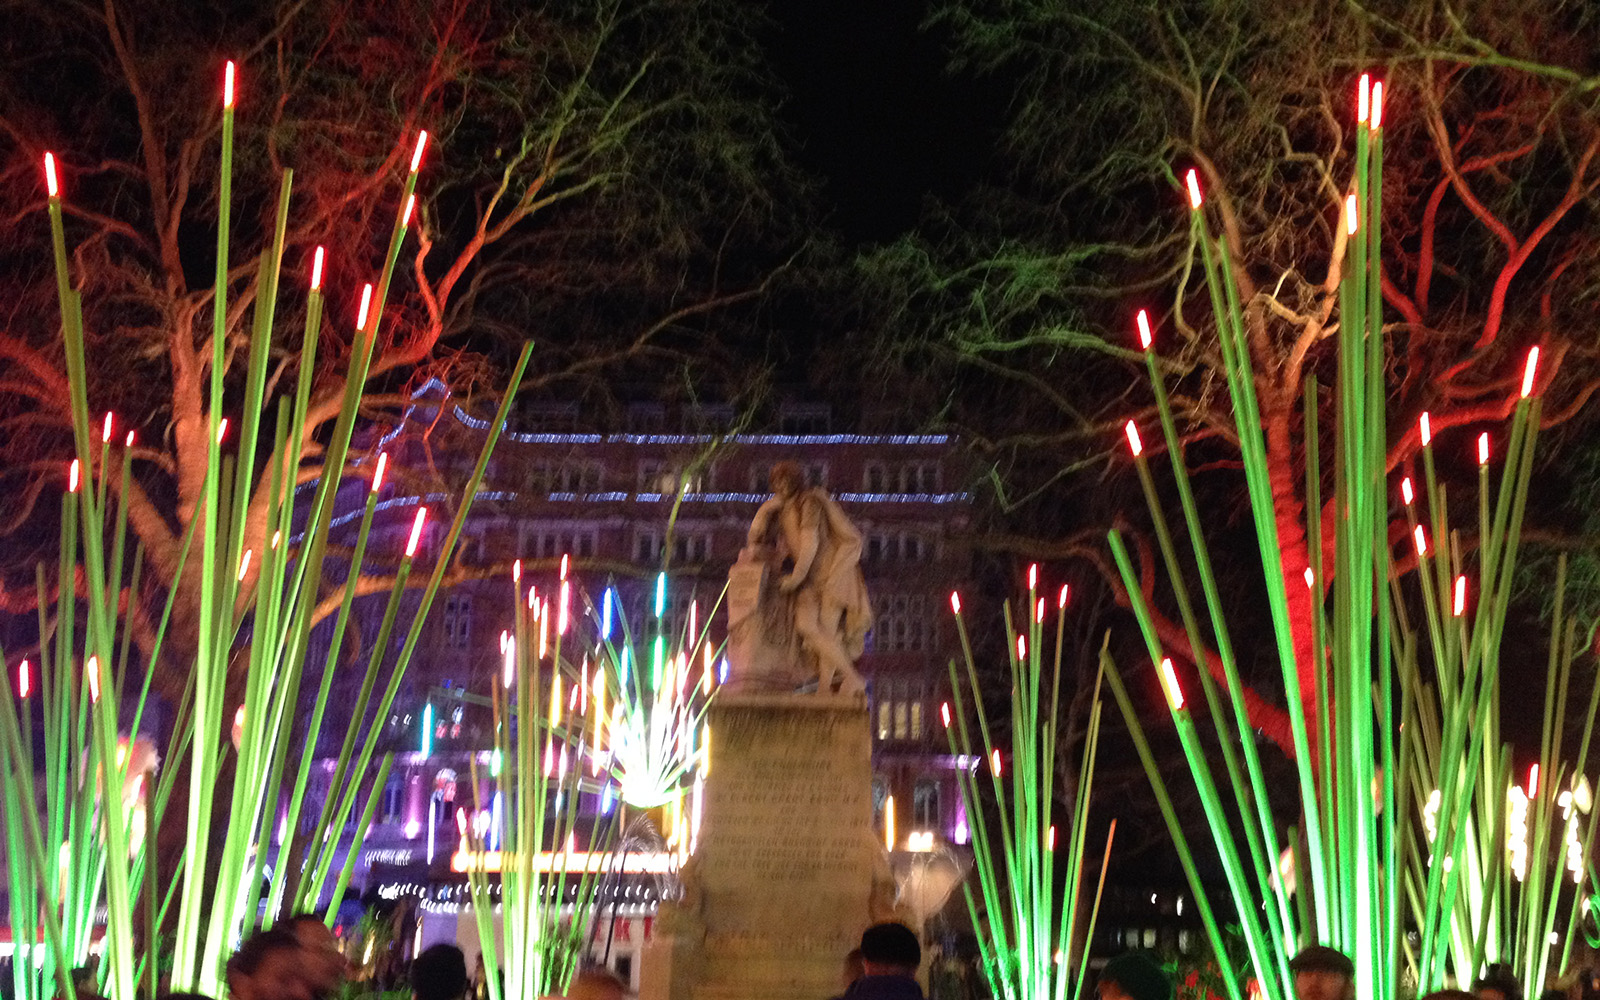 Leicester Square, Lumiere, 14 January 2016